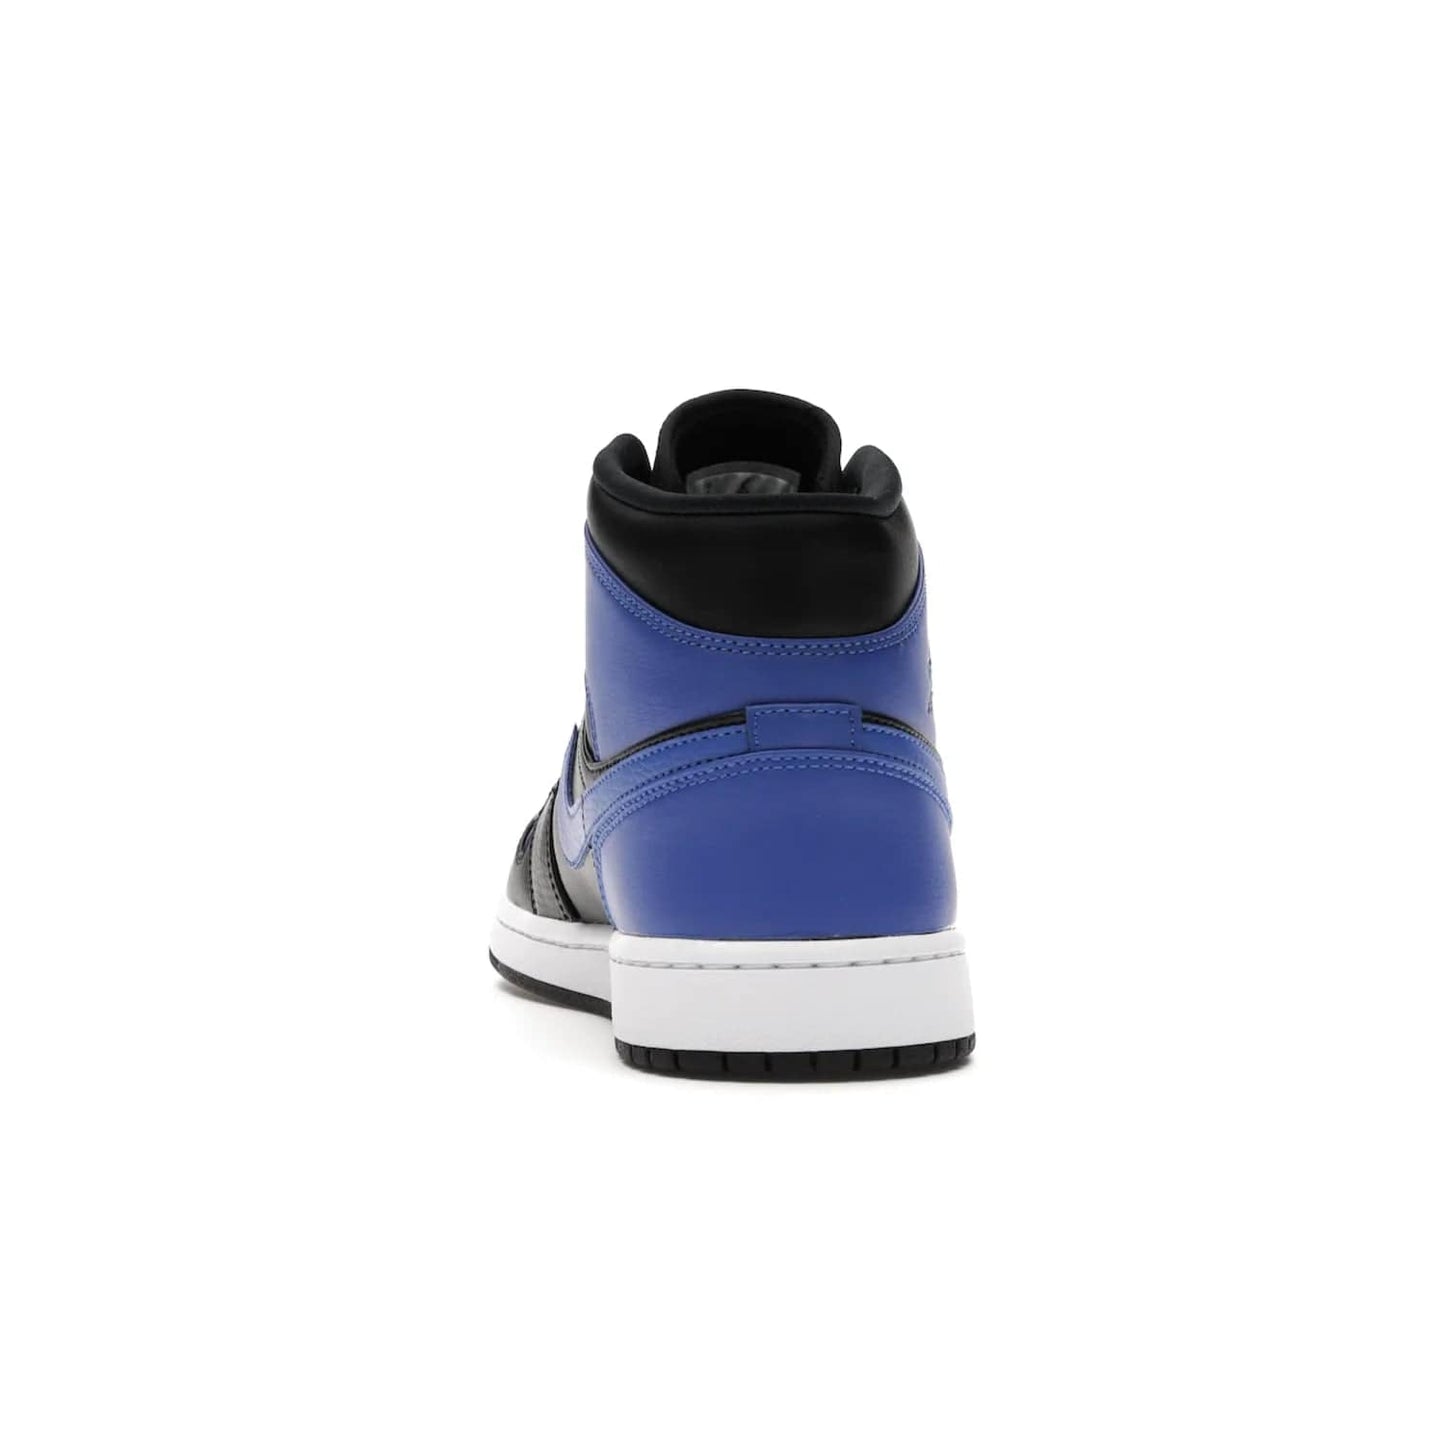 Jordan 1 Mid Hyper Royal Tumbled Leather - Image 27 - Only at www.BallersClubKickz.com - Iconic colorway of the Air Jordan 1 Mid Black Royal Tumbled Leather. Features a black tumbled leather upper, royal blue leather overlays, white midsole & black rubber outsole. Released December 2020. Adds premium style to any collection.